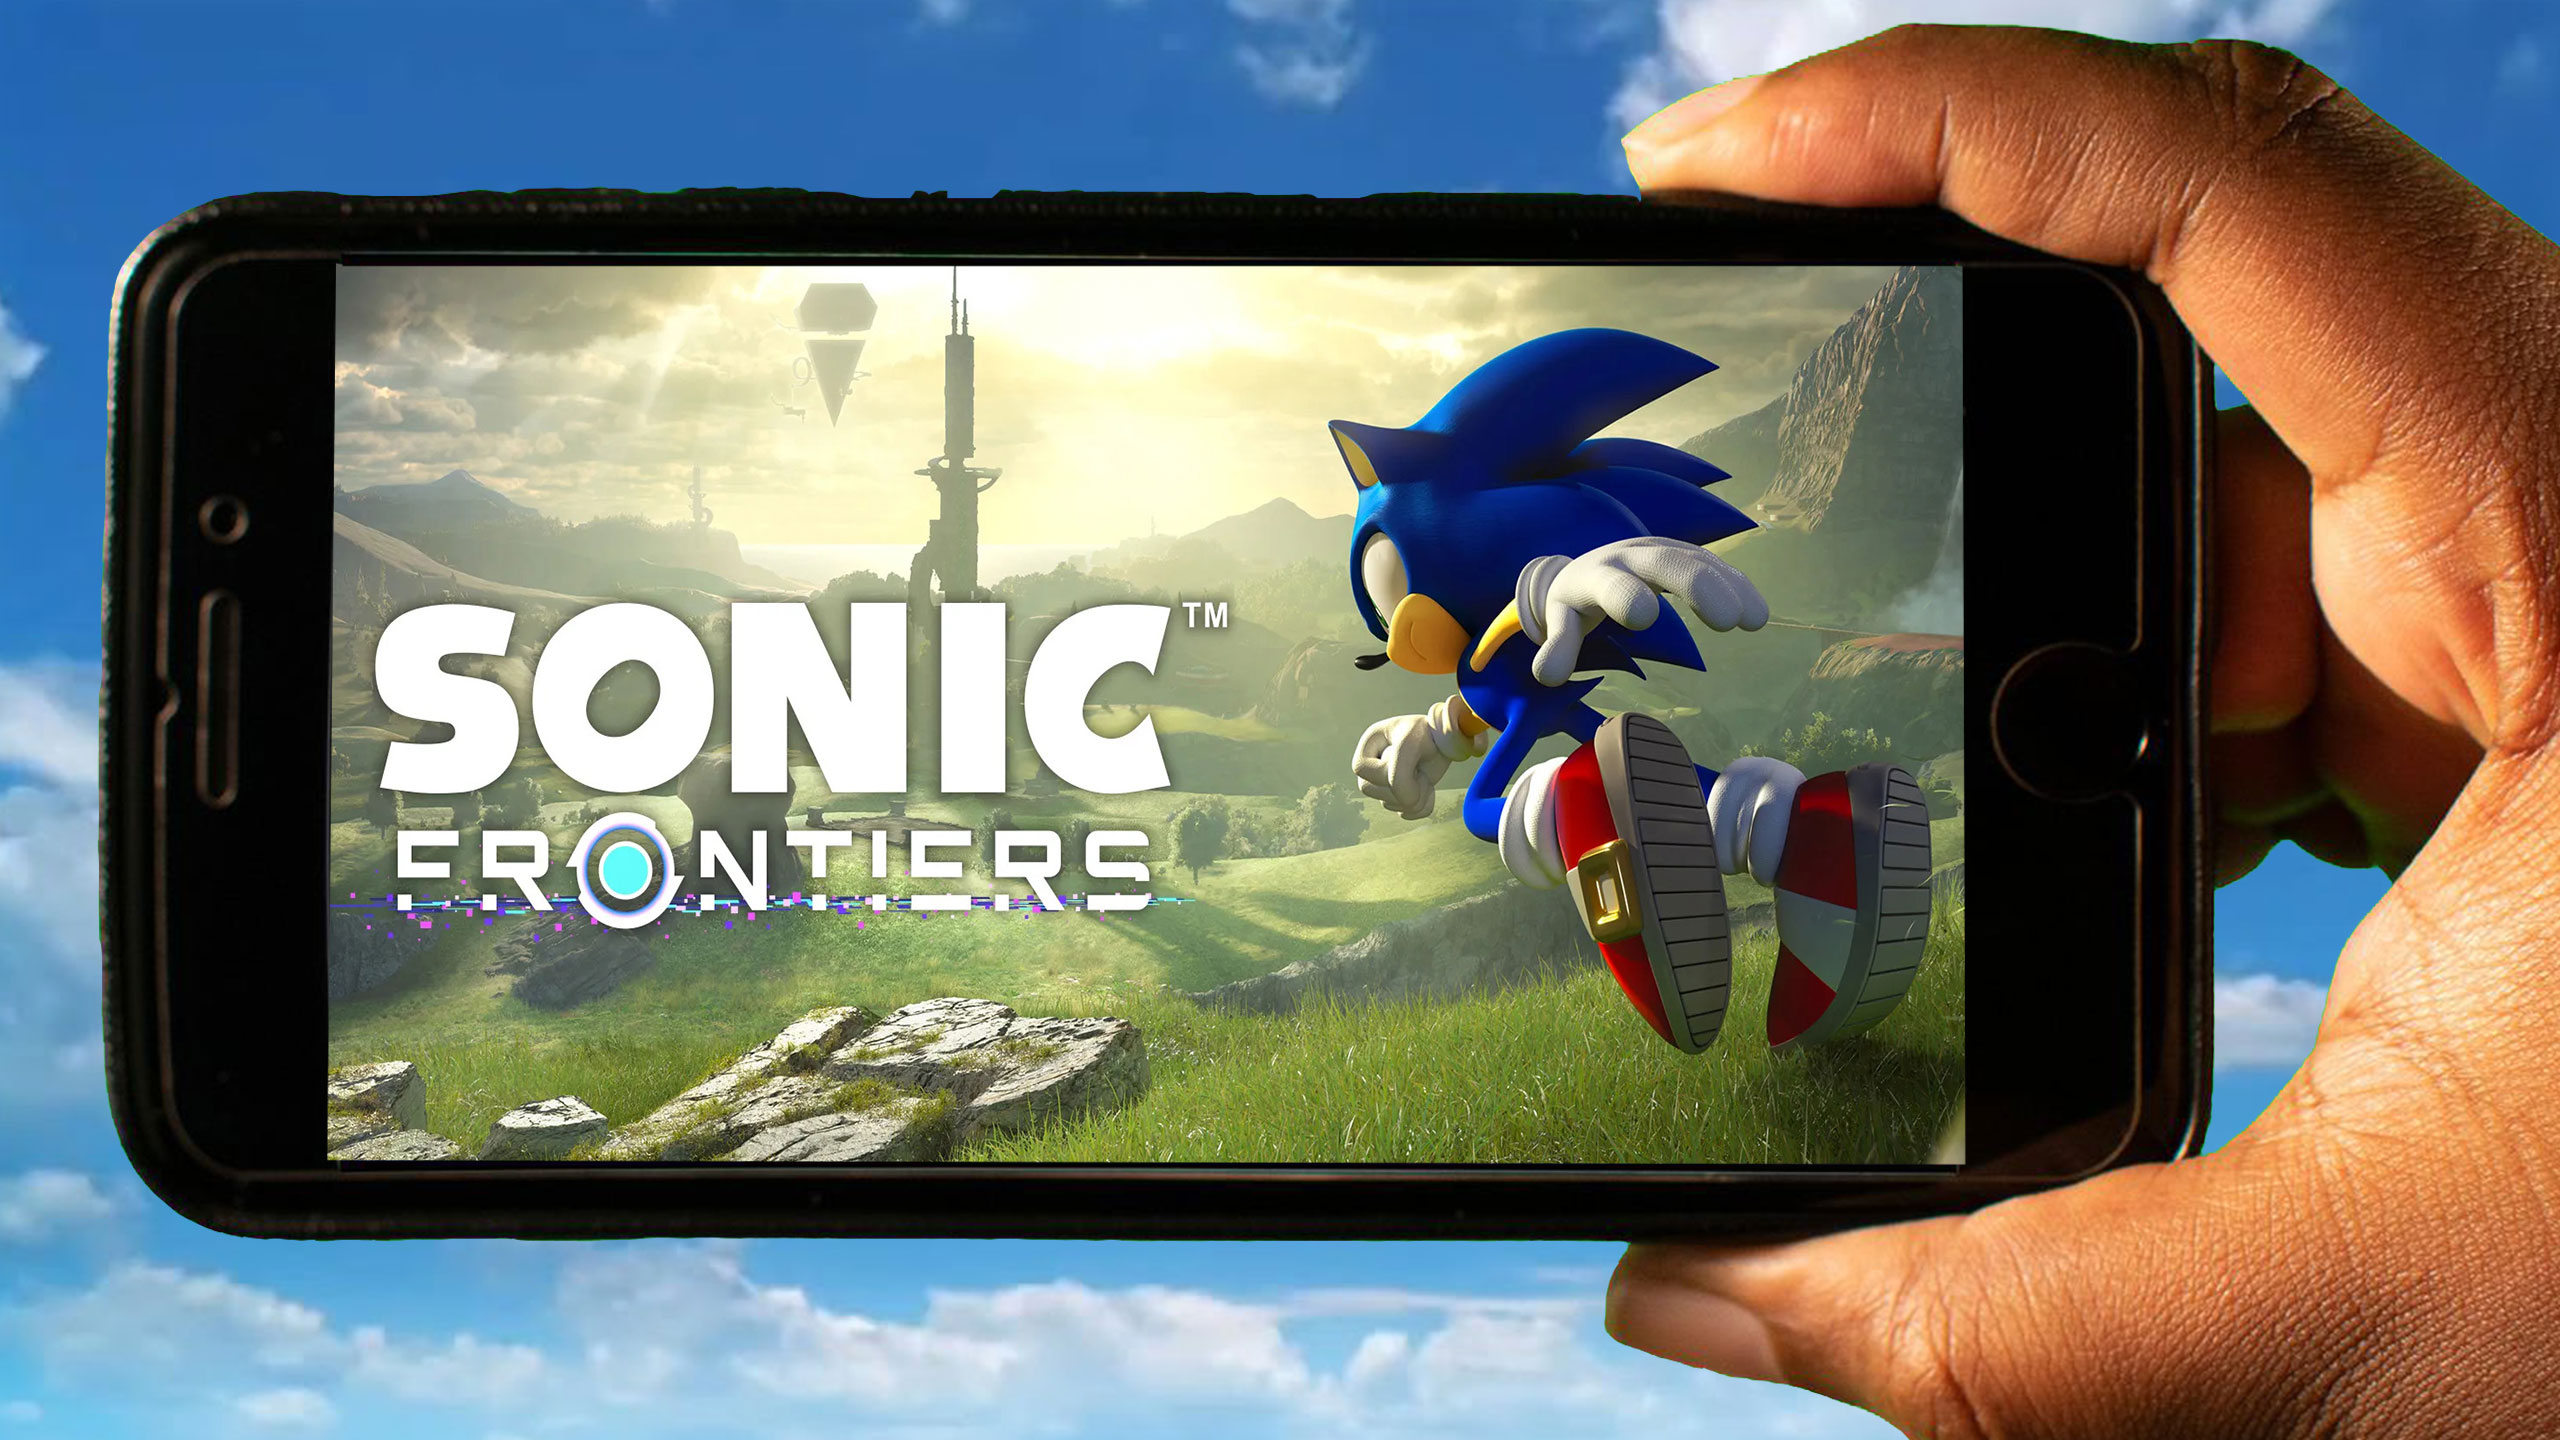 Sonic Frontiers Apk Mobile Android Version Full Game Setup Free Download -  Hut Mobile